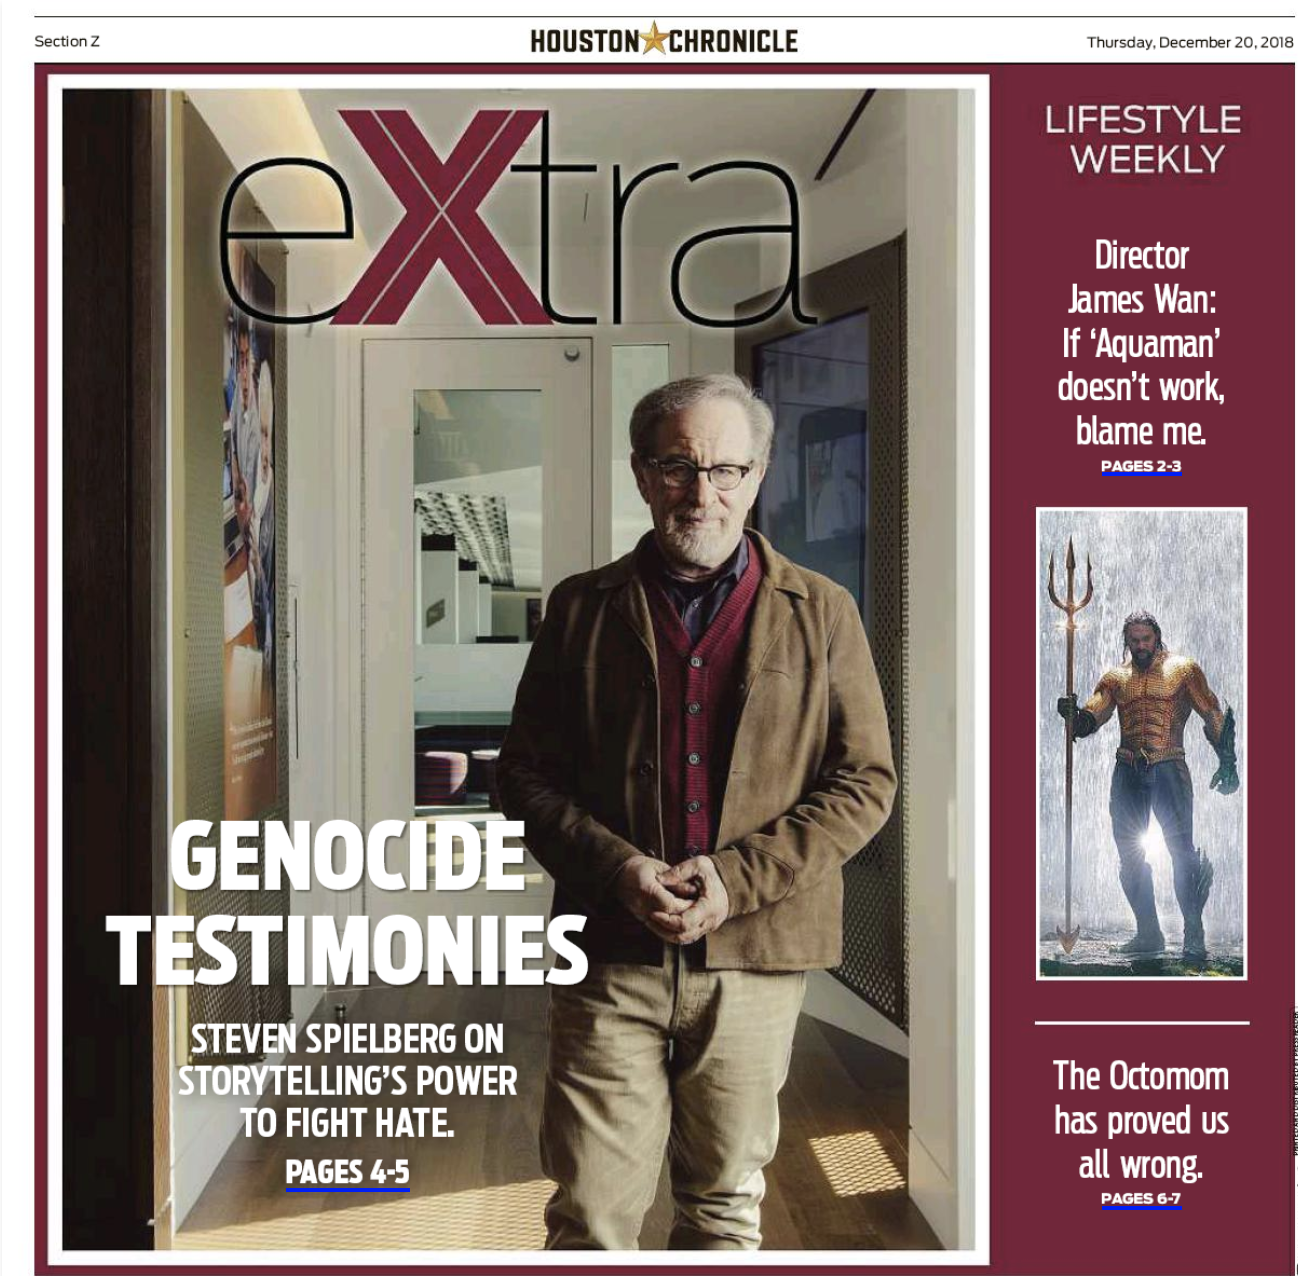 HoustonChronicle_Genocide-Testimonies-Steven-Spielberg-on-storytelling_s-power-to-fight-hate_20_12_18Cover